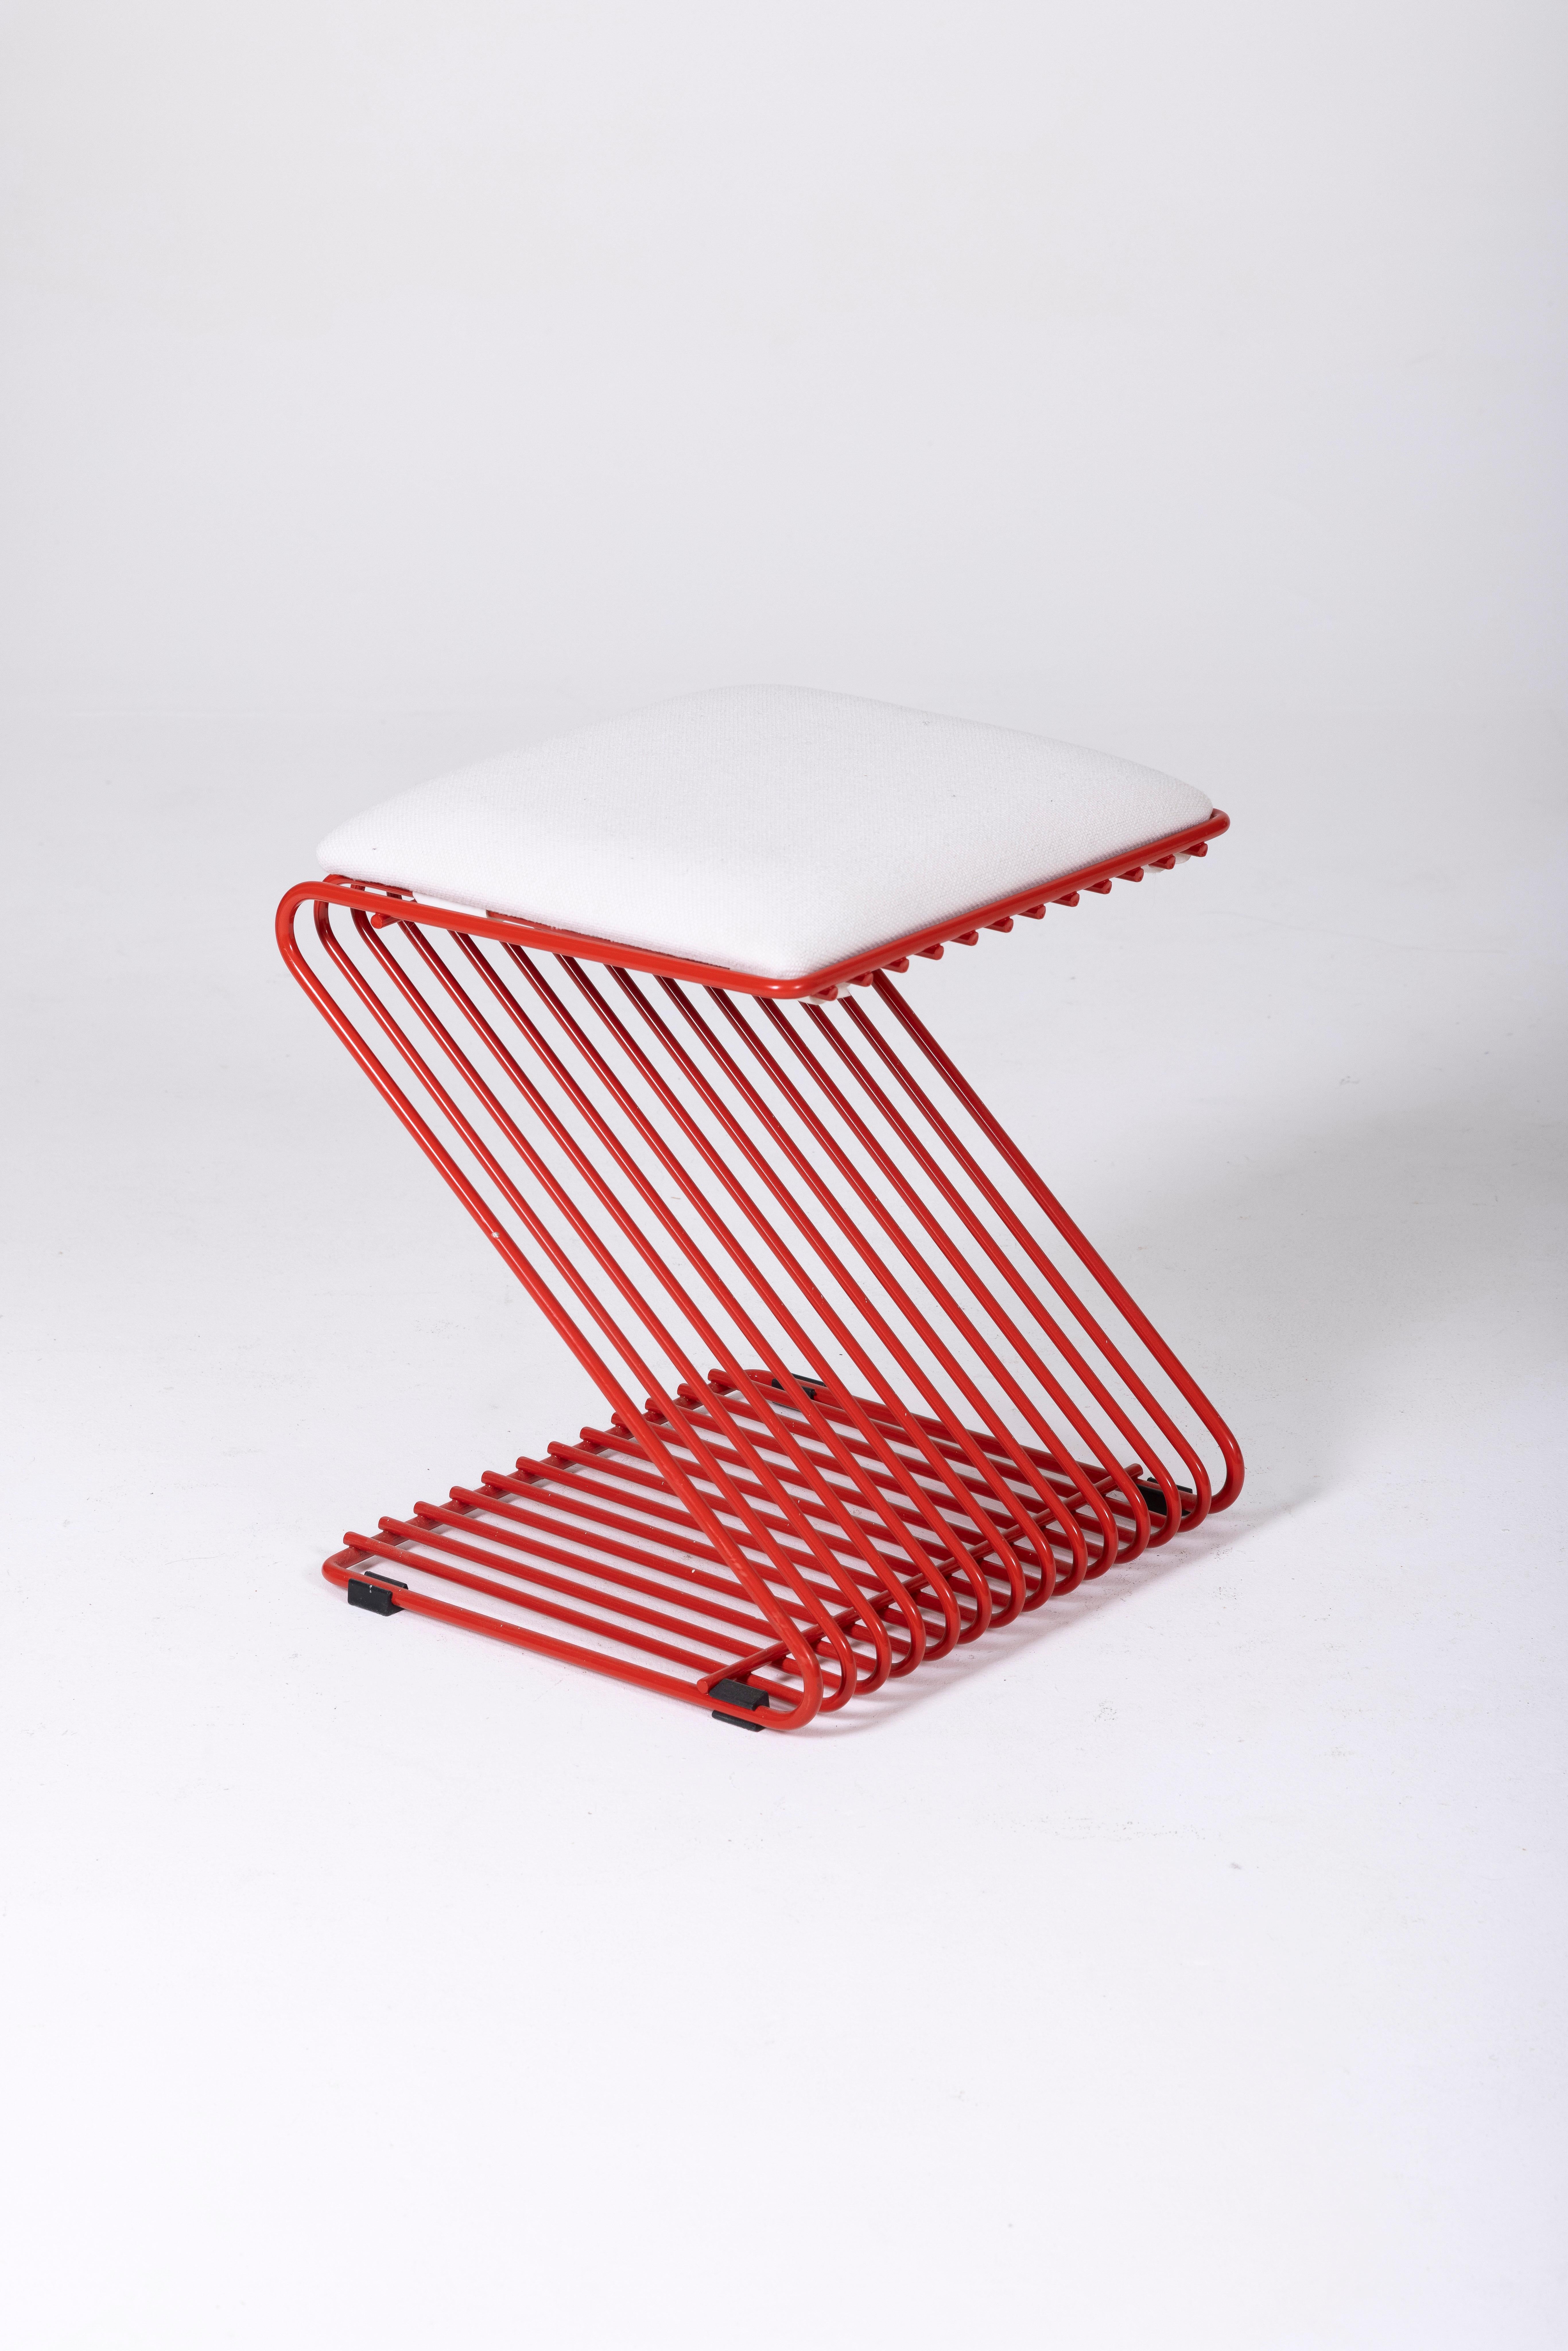 Z Stool by designer François Arnal for Atelier A. The cushion is in white fabric, and the tubular structure is in red lacquered metal. In perfect condition.
DV65